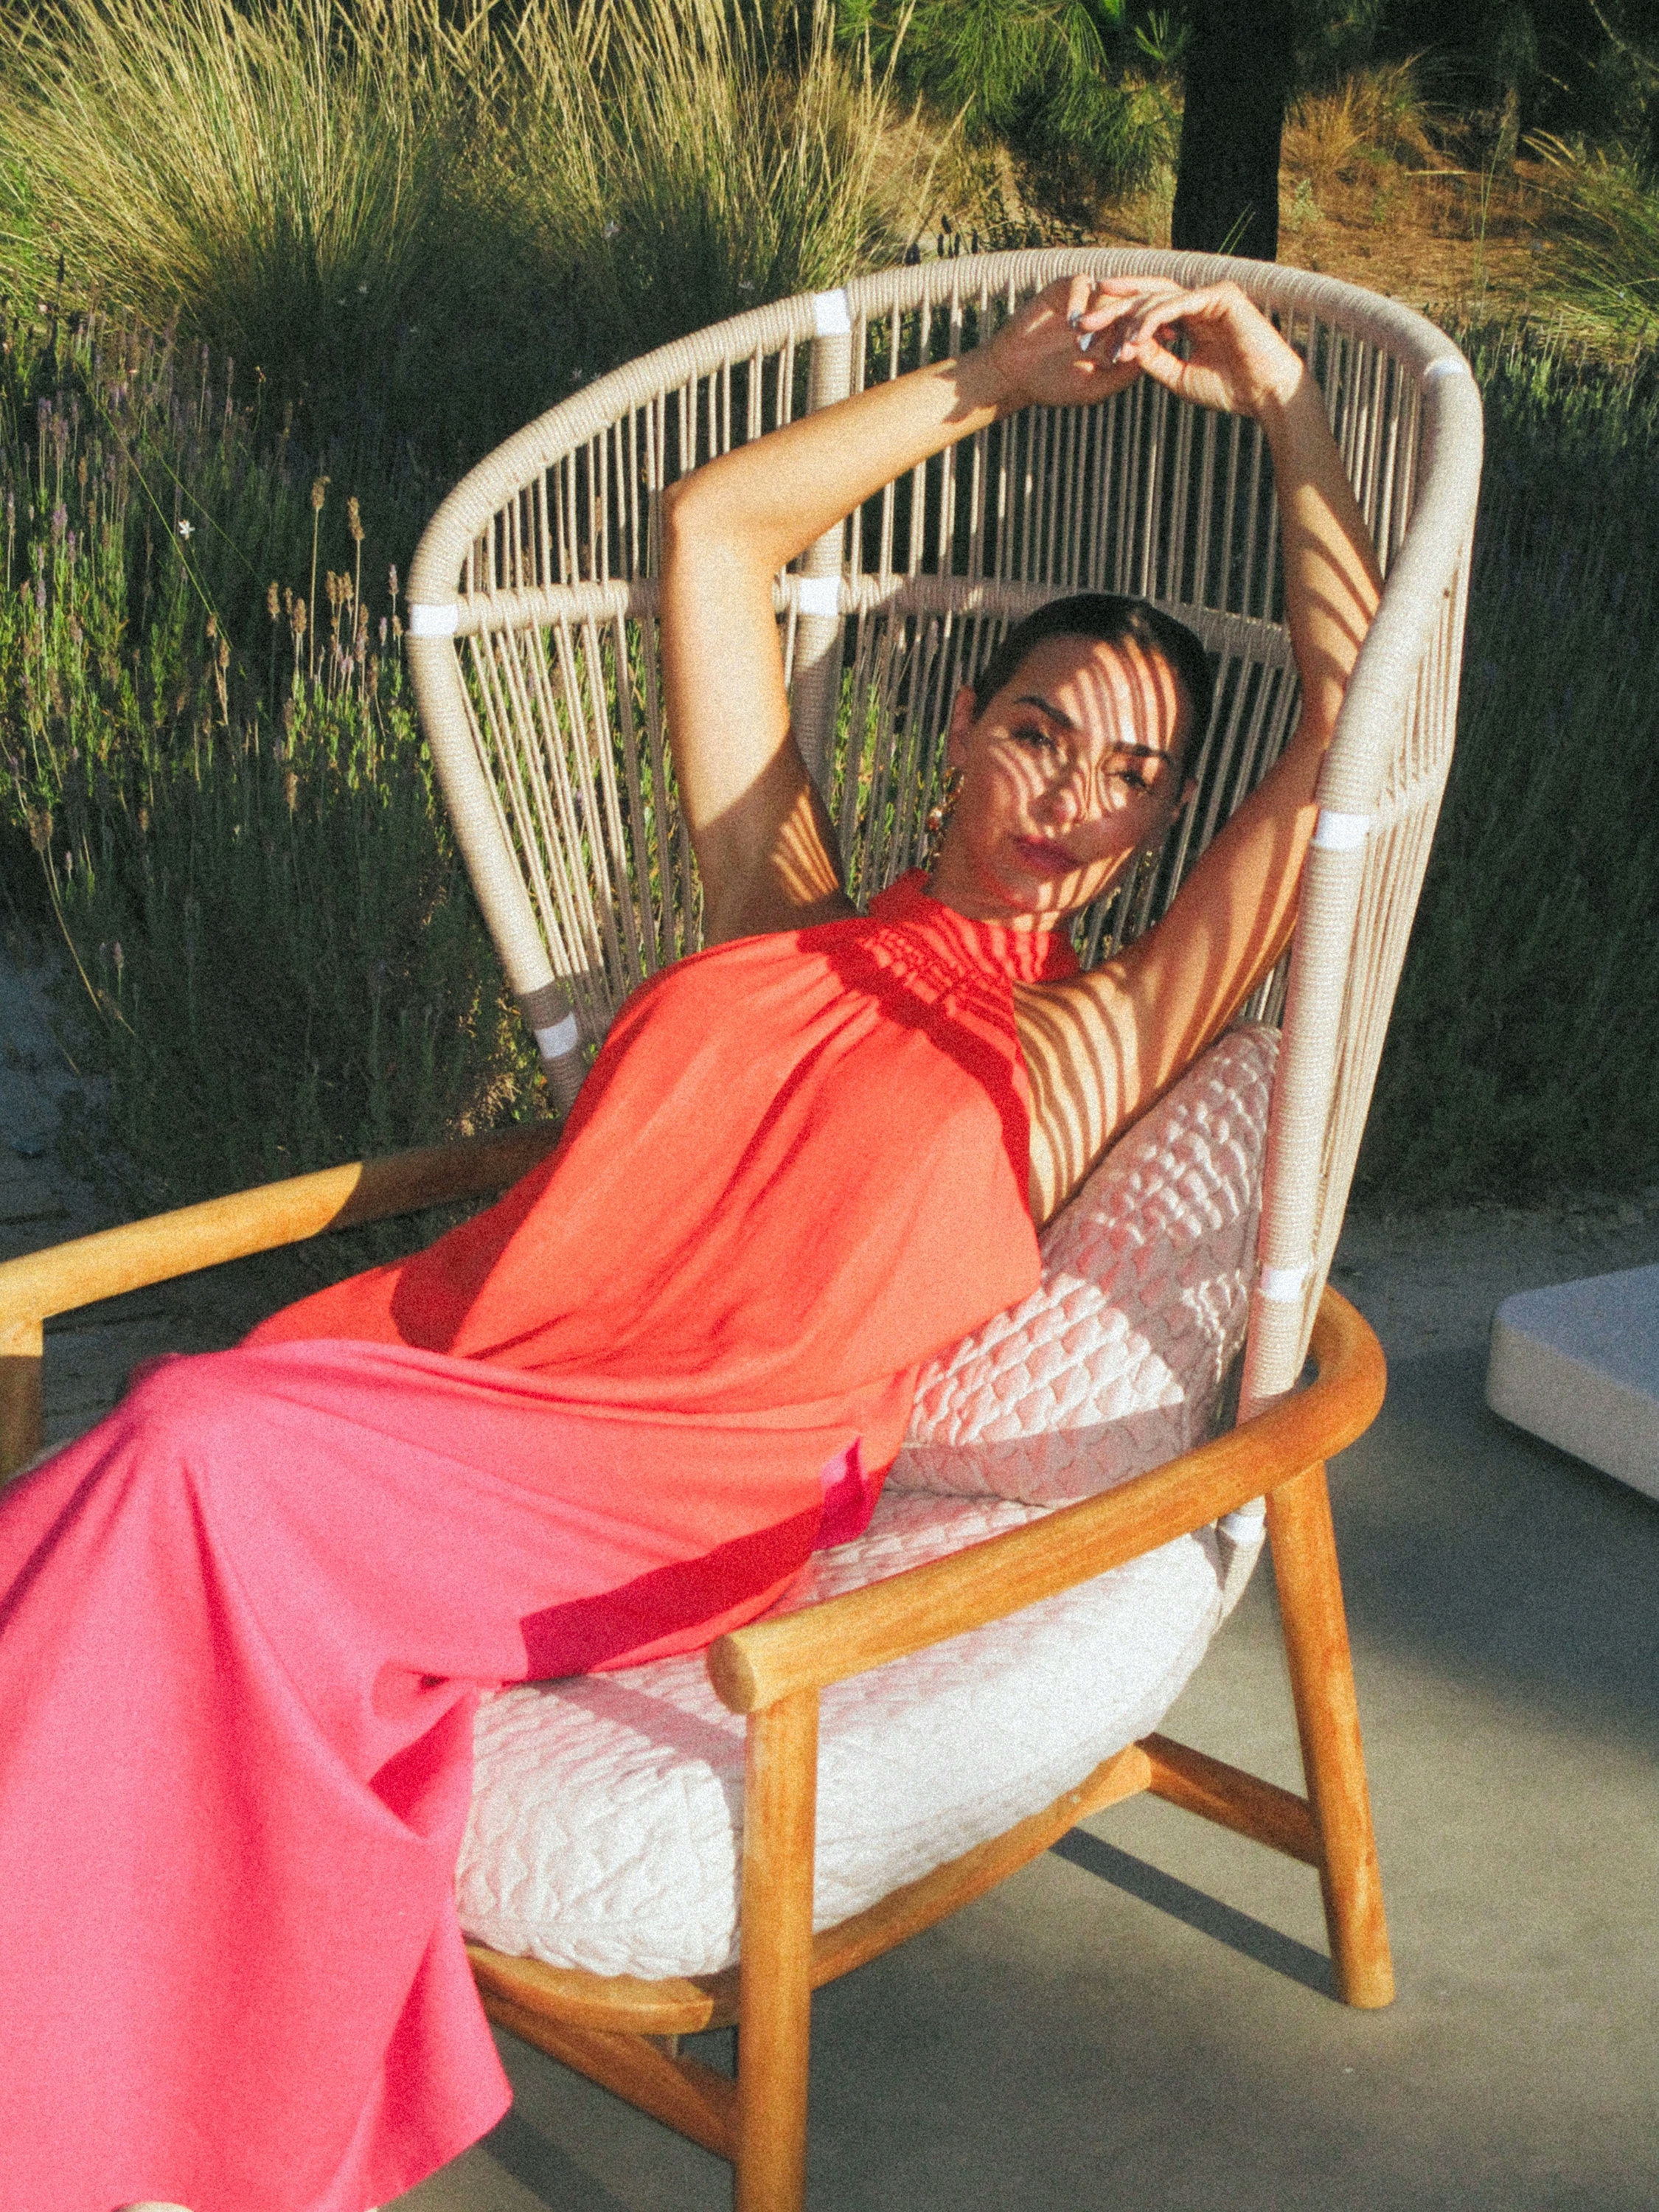 Vanessa Martins unveils a breathtaking array of long gradient dresses, capturing the spirit of sunny days and balmy evenings in a spellbinding photoshoot.